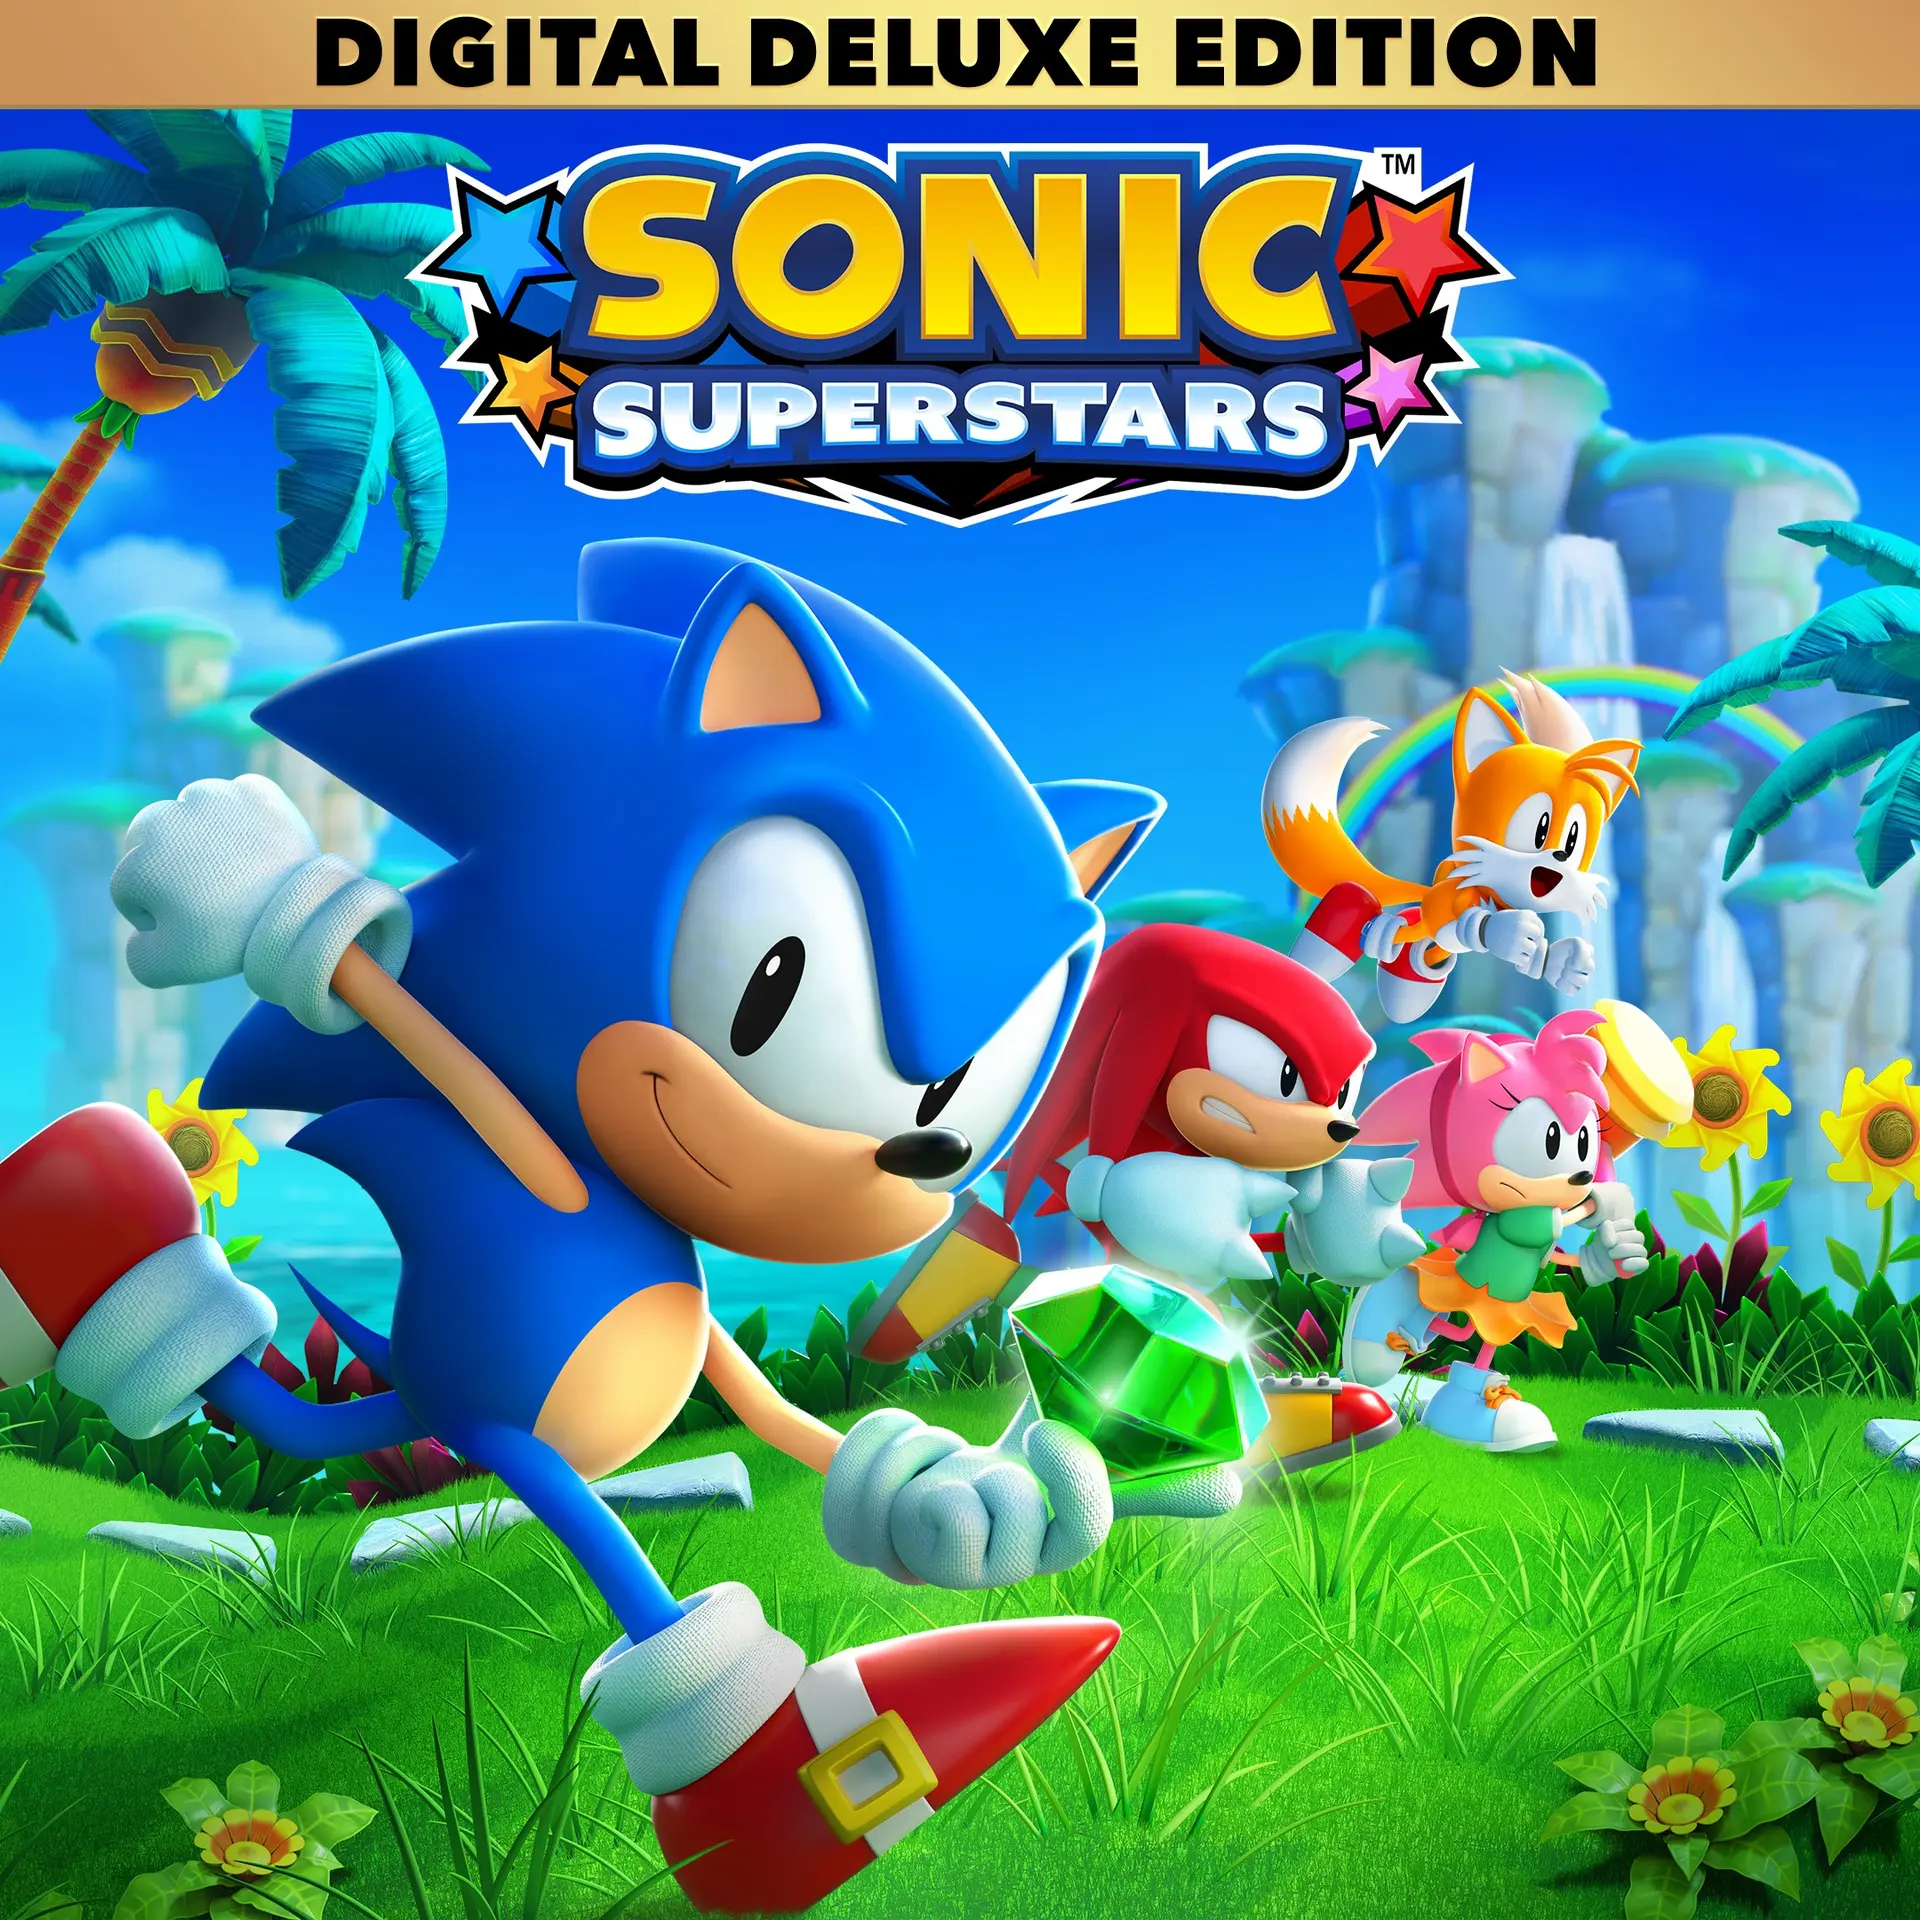 SONIC SUPERSTARS Digital Deluxe Edition featuring LEGO (Xbox Game EU)